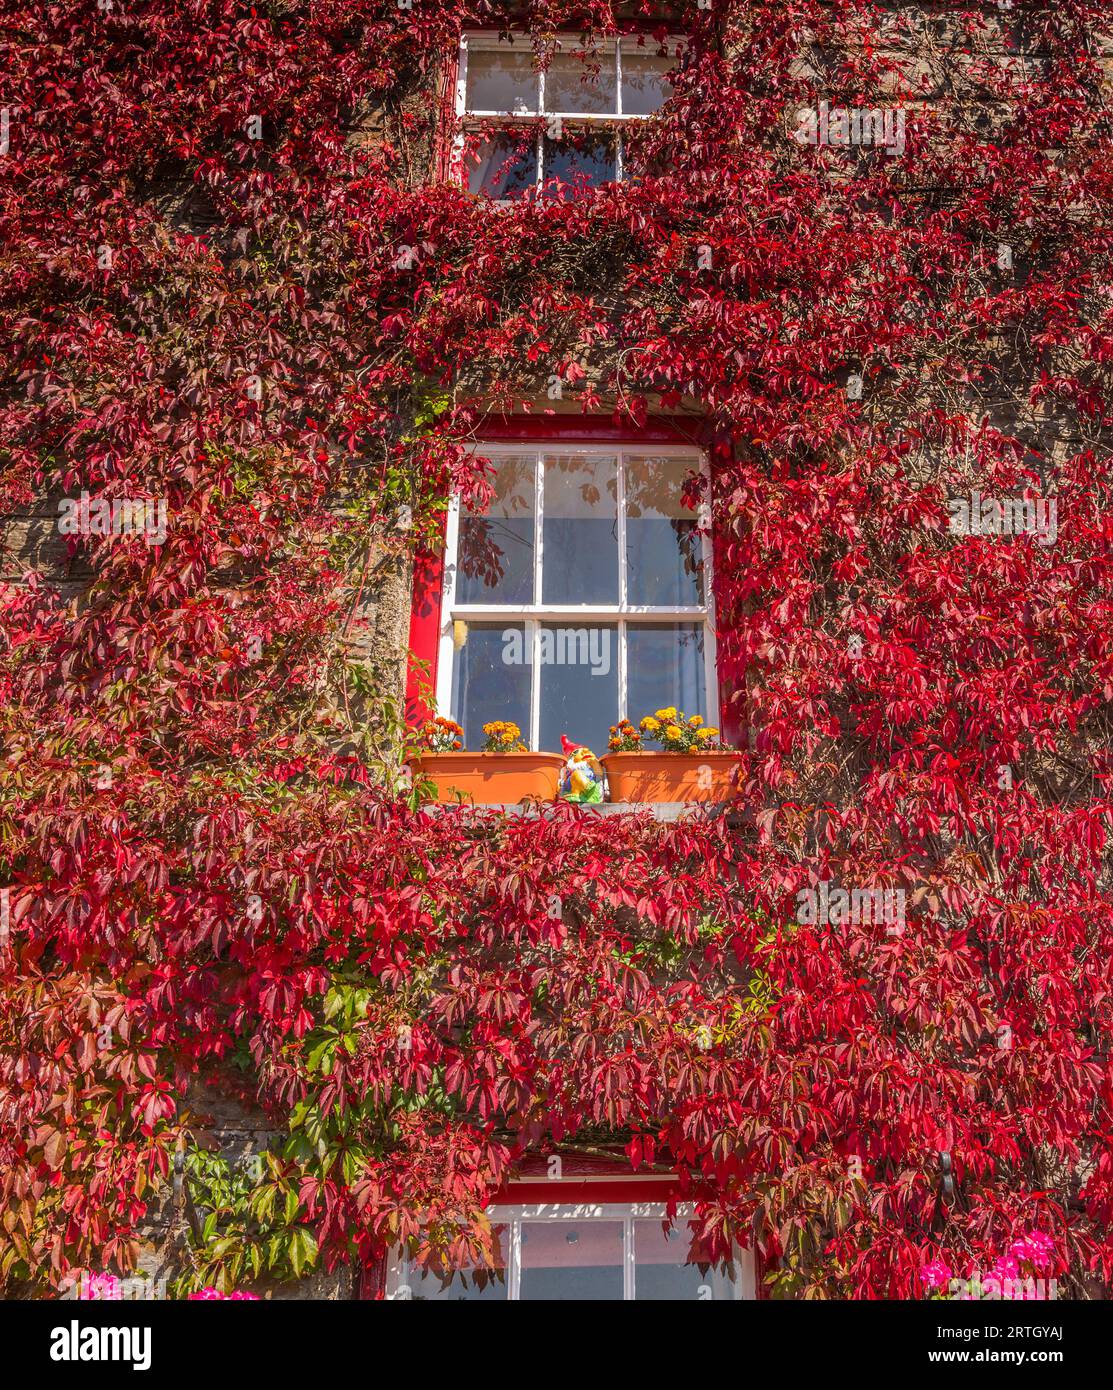 The old mill at Ynys, near Harlech and covered in ivy with leaves changing into their autumn red colour. Stock Photo